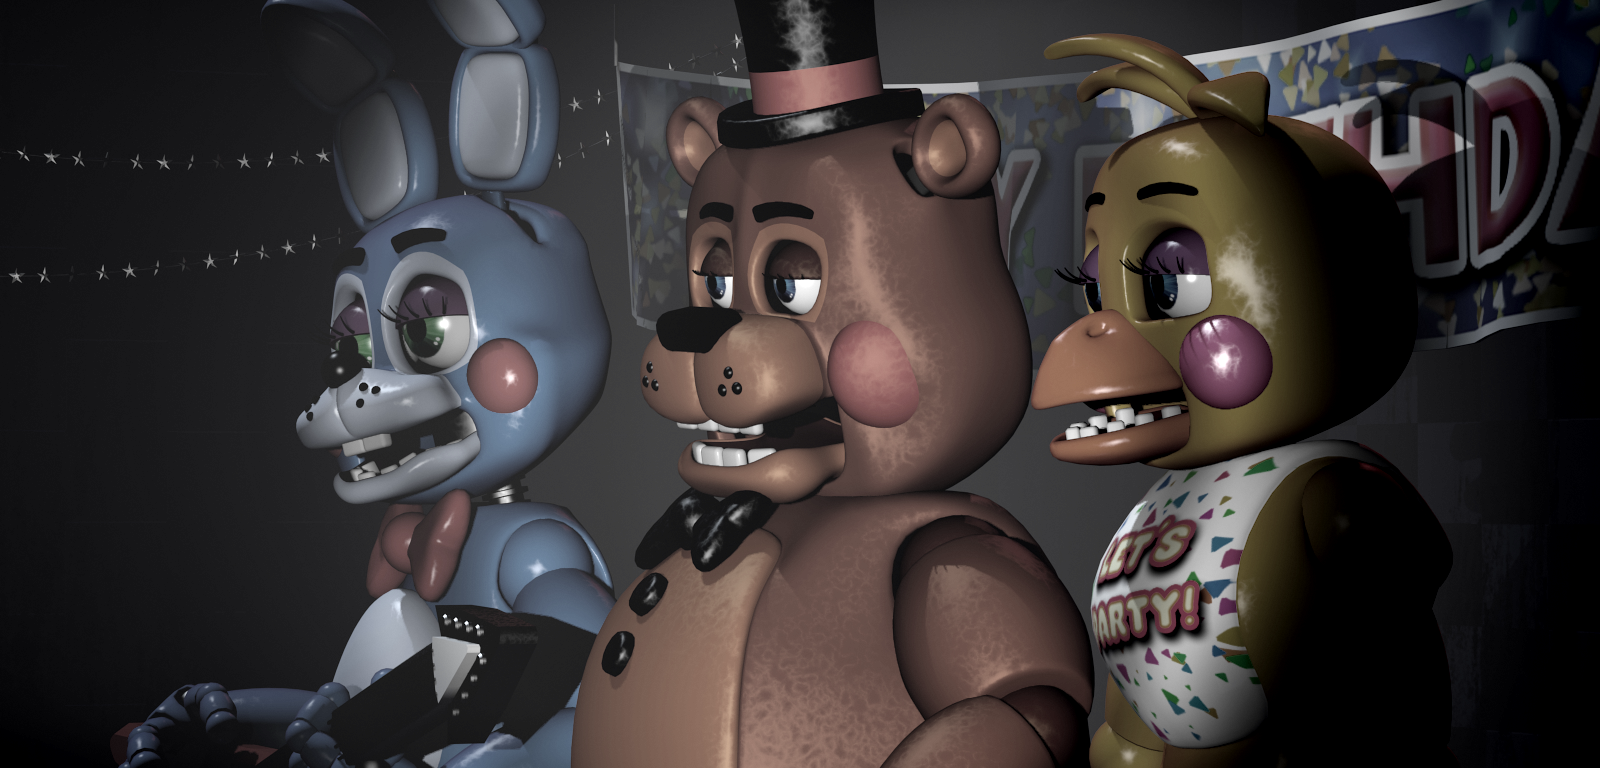 ALL animatronics and their Locations (Positions) - Five nights at